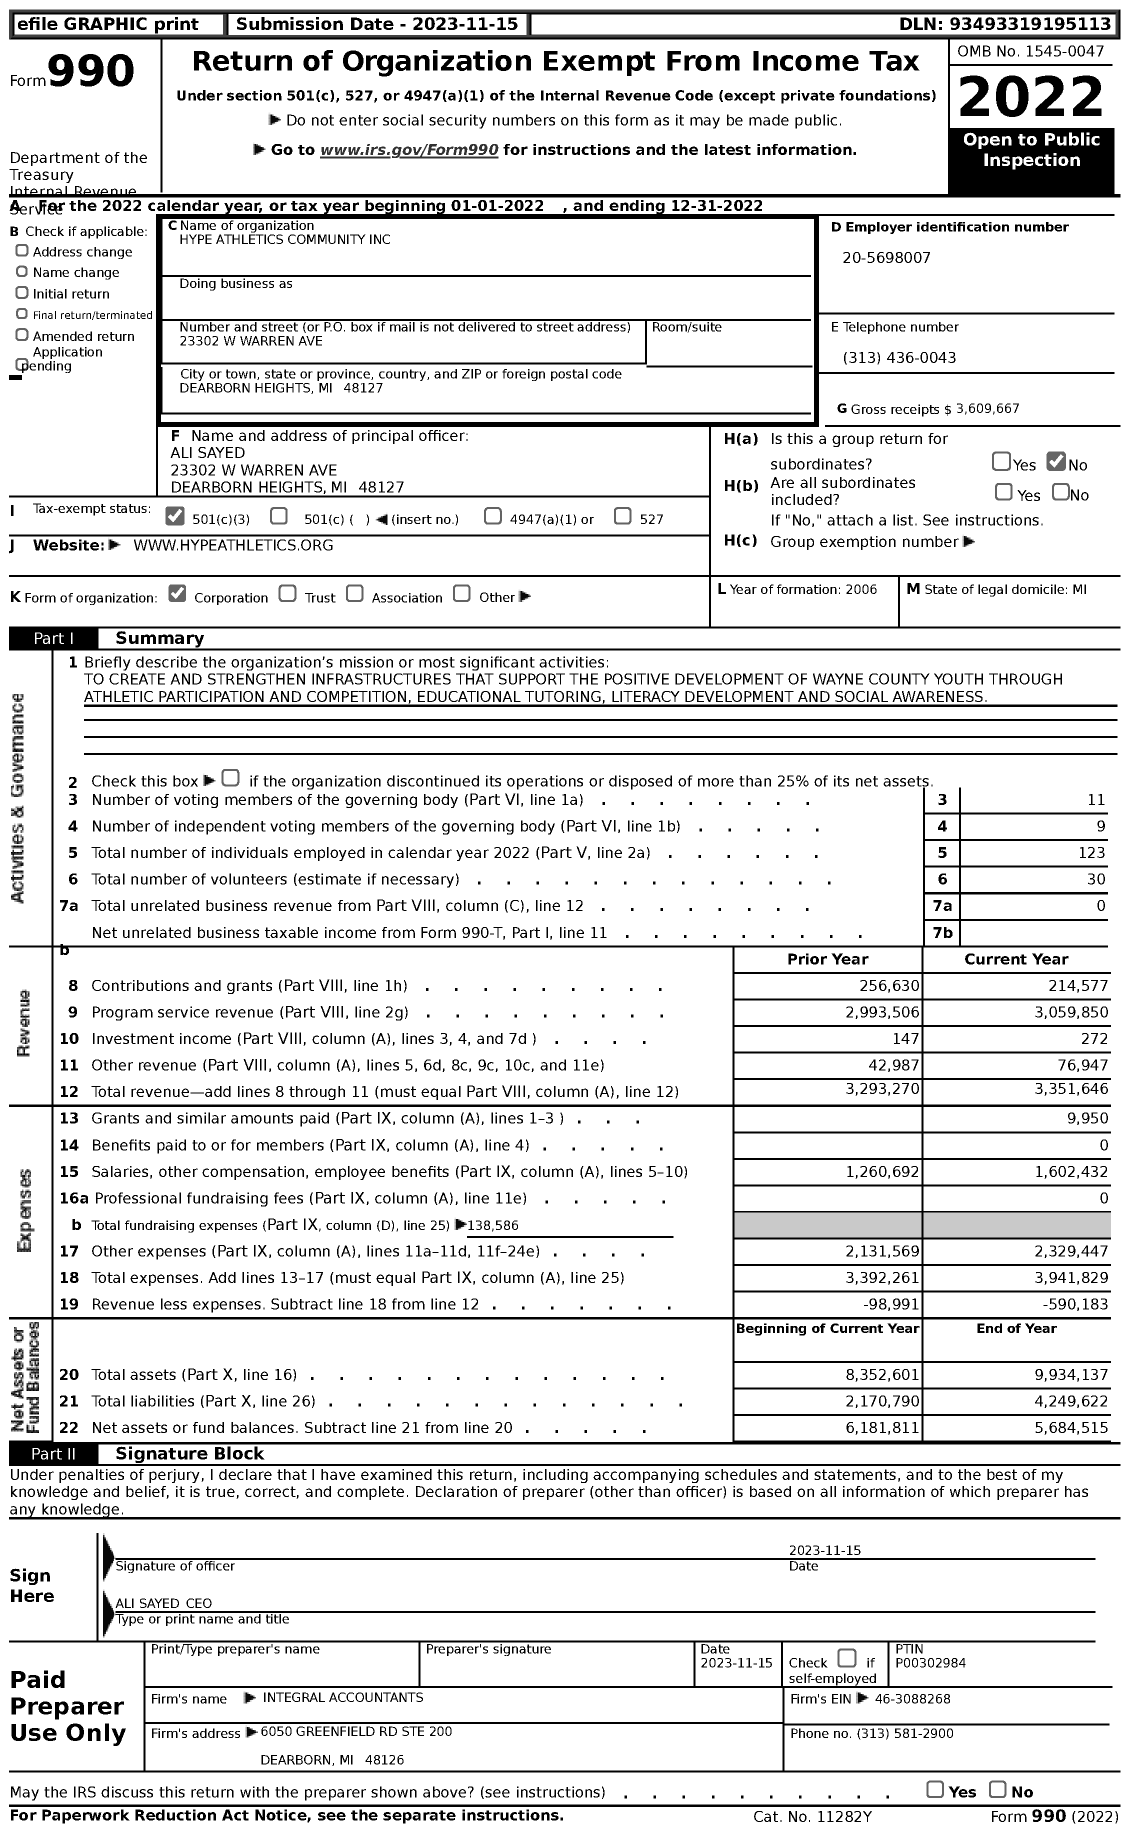 Image of first page of 2022 Form 990 for Hype Athletics Community